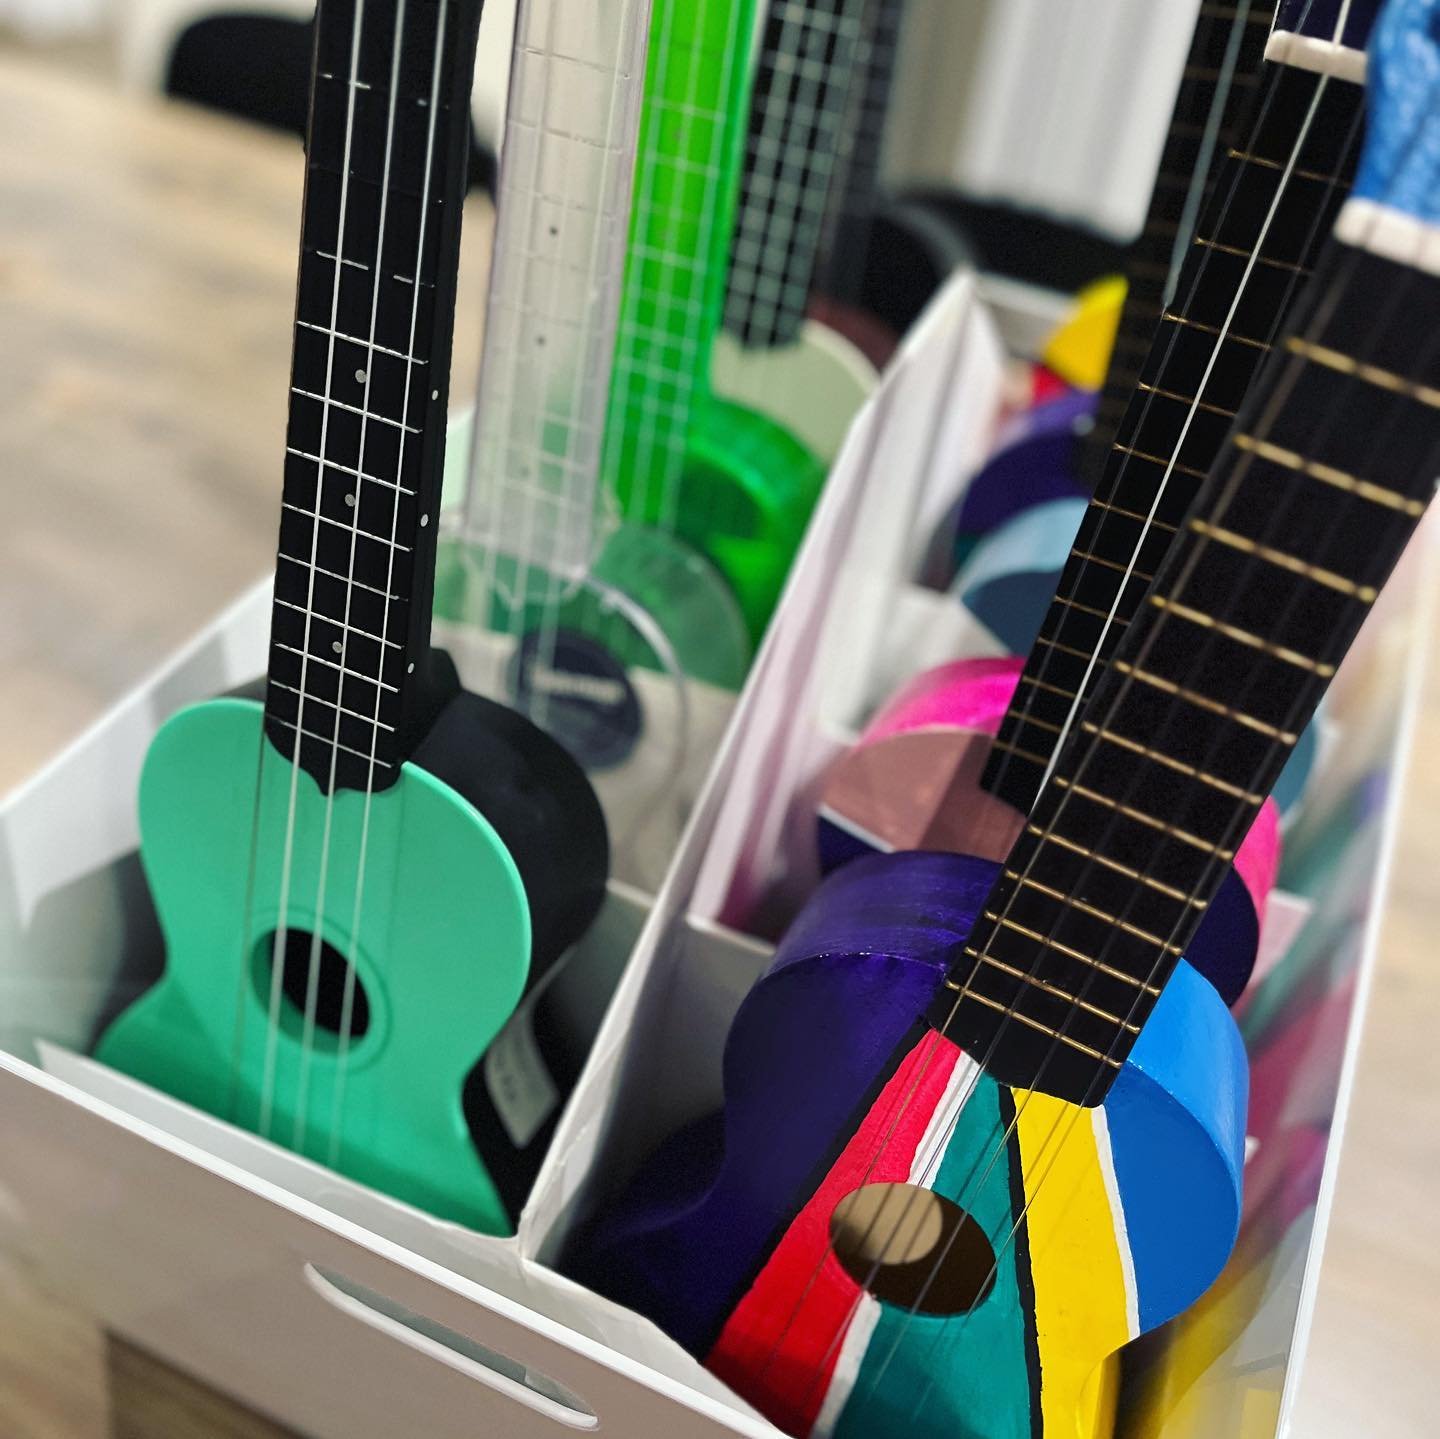 Portable ukulele storage&hellip; a MUST for any music teacher who travels or has limited space. I take a travel box (or two!) when I lead school workshops or teacher clinics so that I can bring my uke fleet on site for participants to use. My old uke